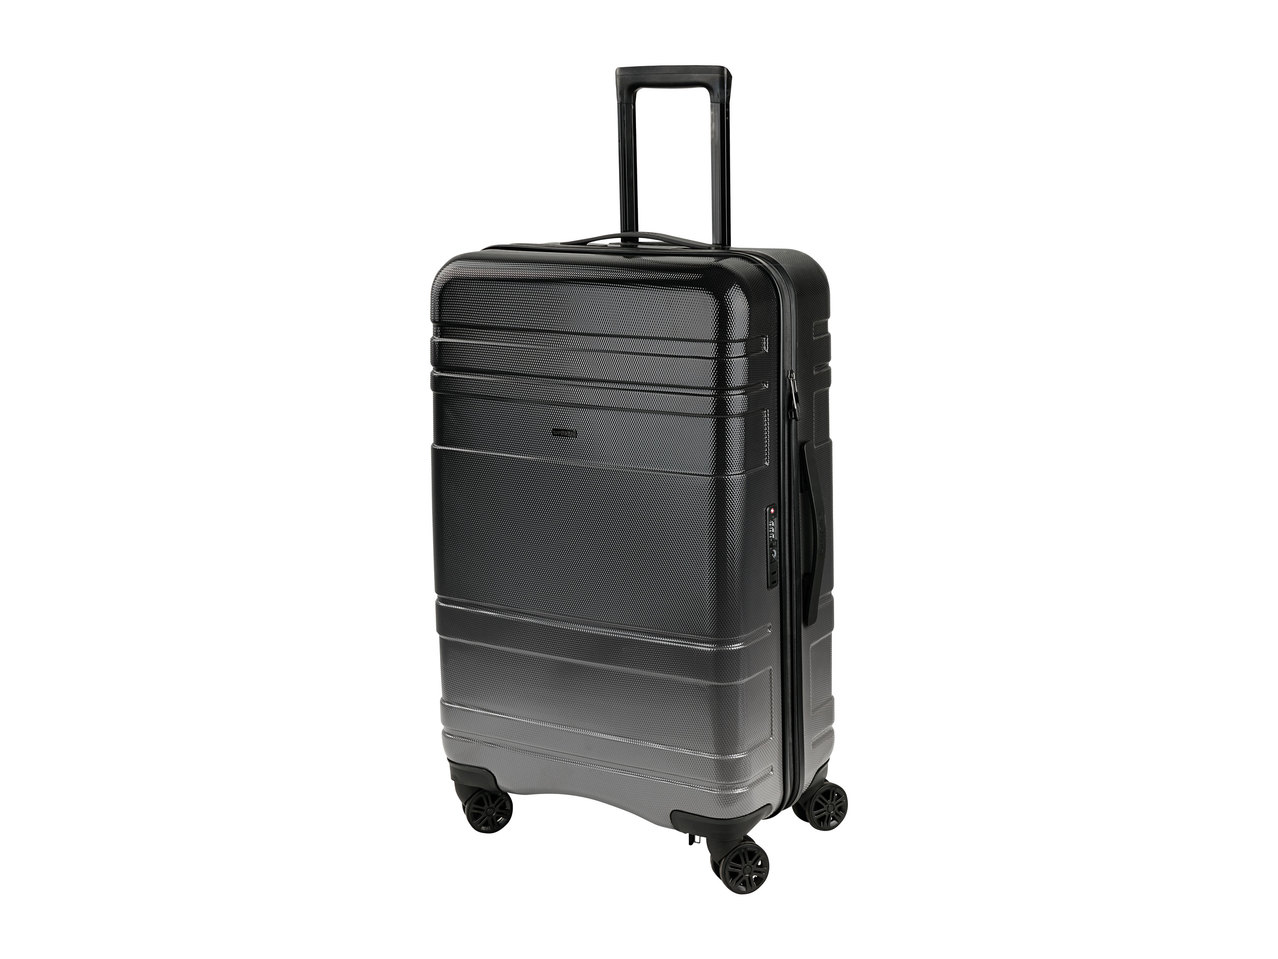 Top Move Black Trolley Suitcase1